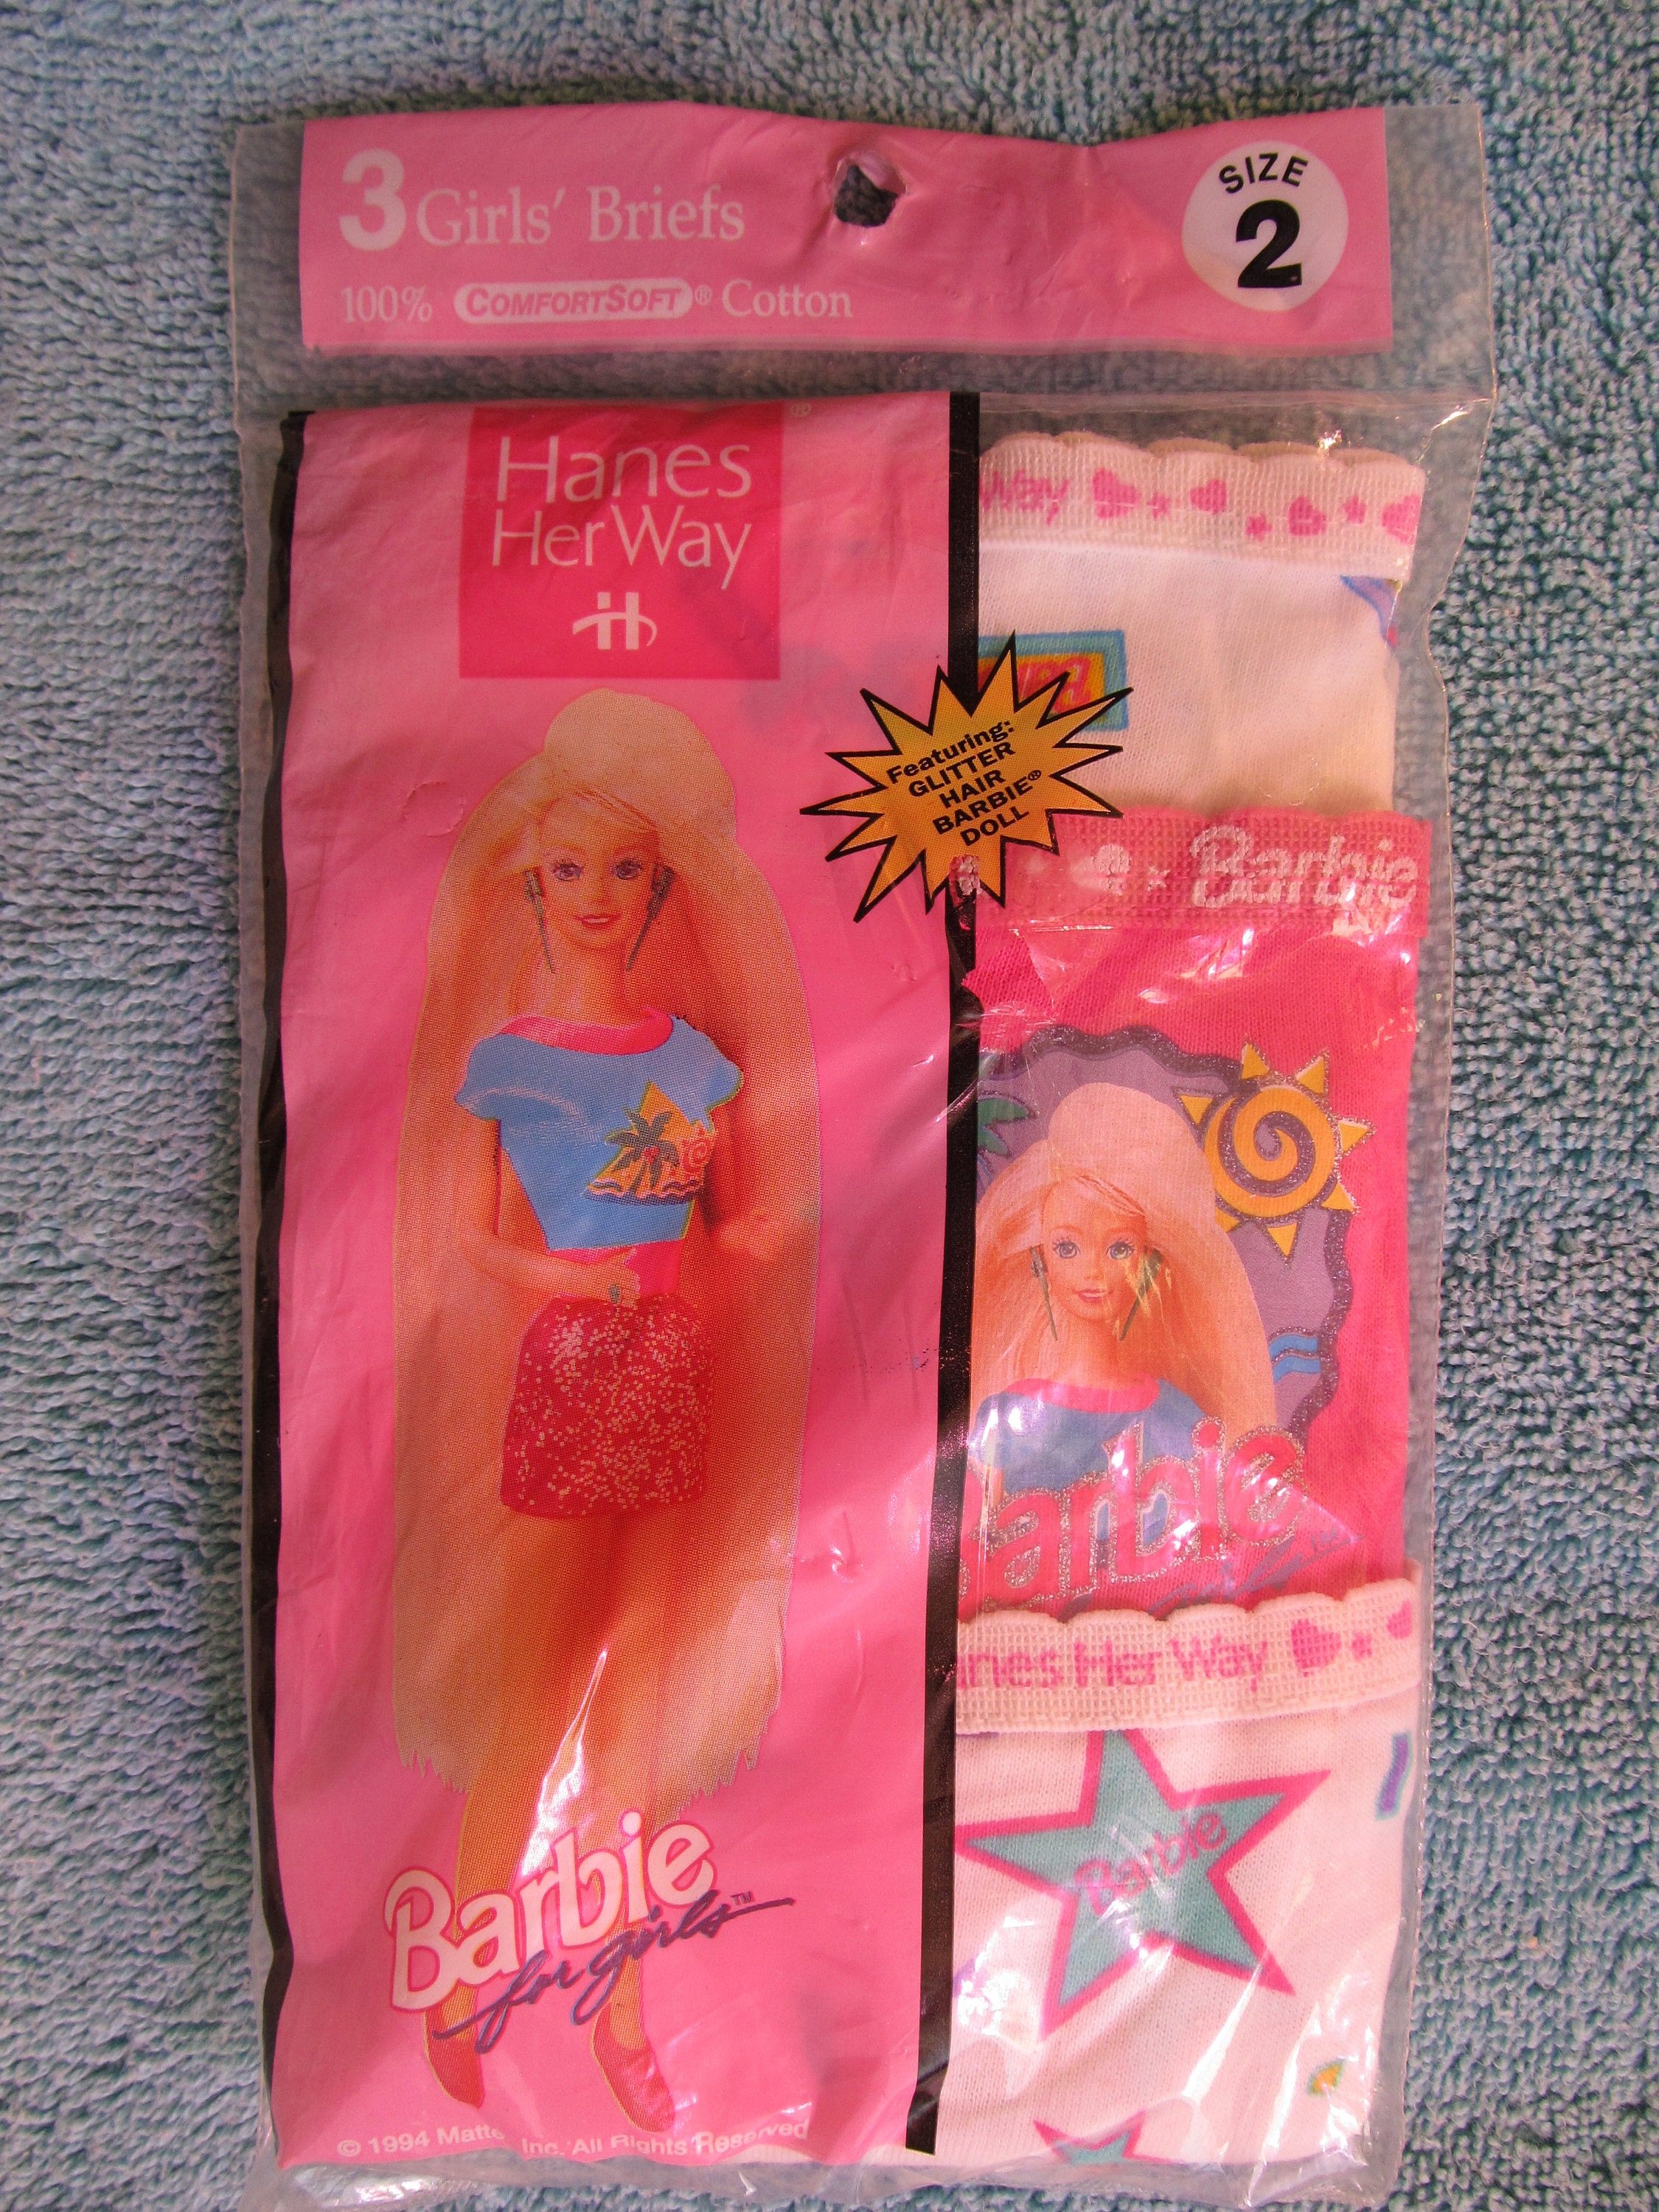 Hanes Her Way Barbie For Girls Briefs - Size 2 - New in Package of 3  Featuring Glitter Hair Barbie Doll